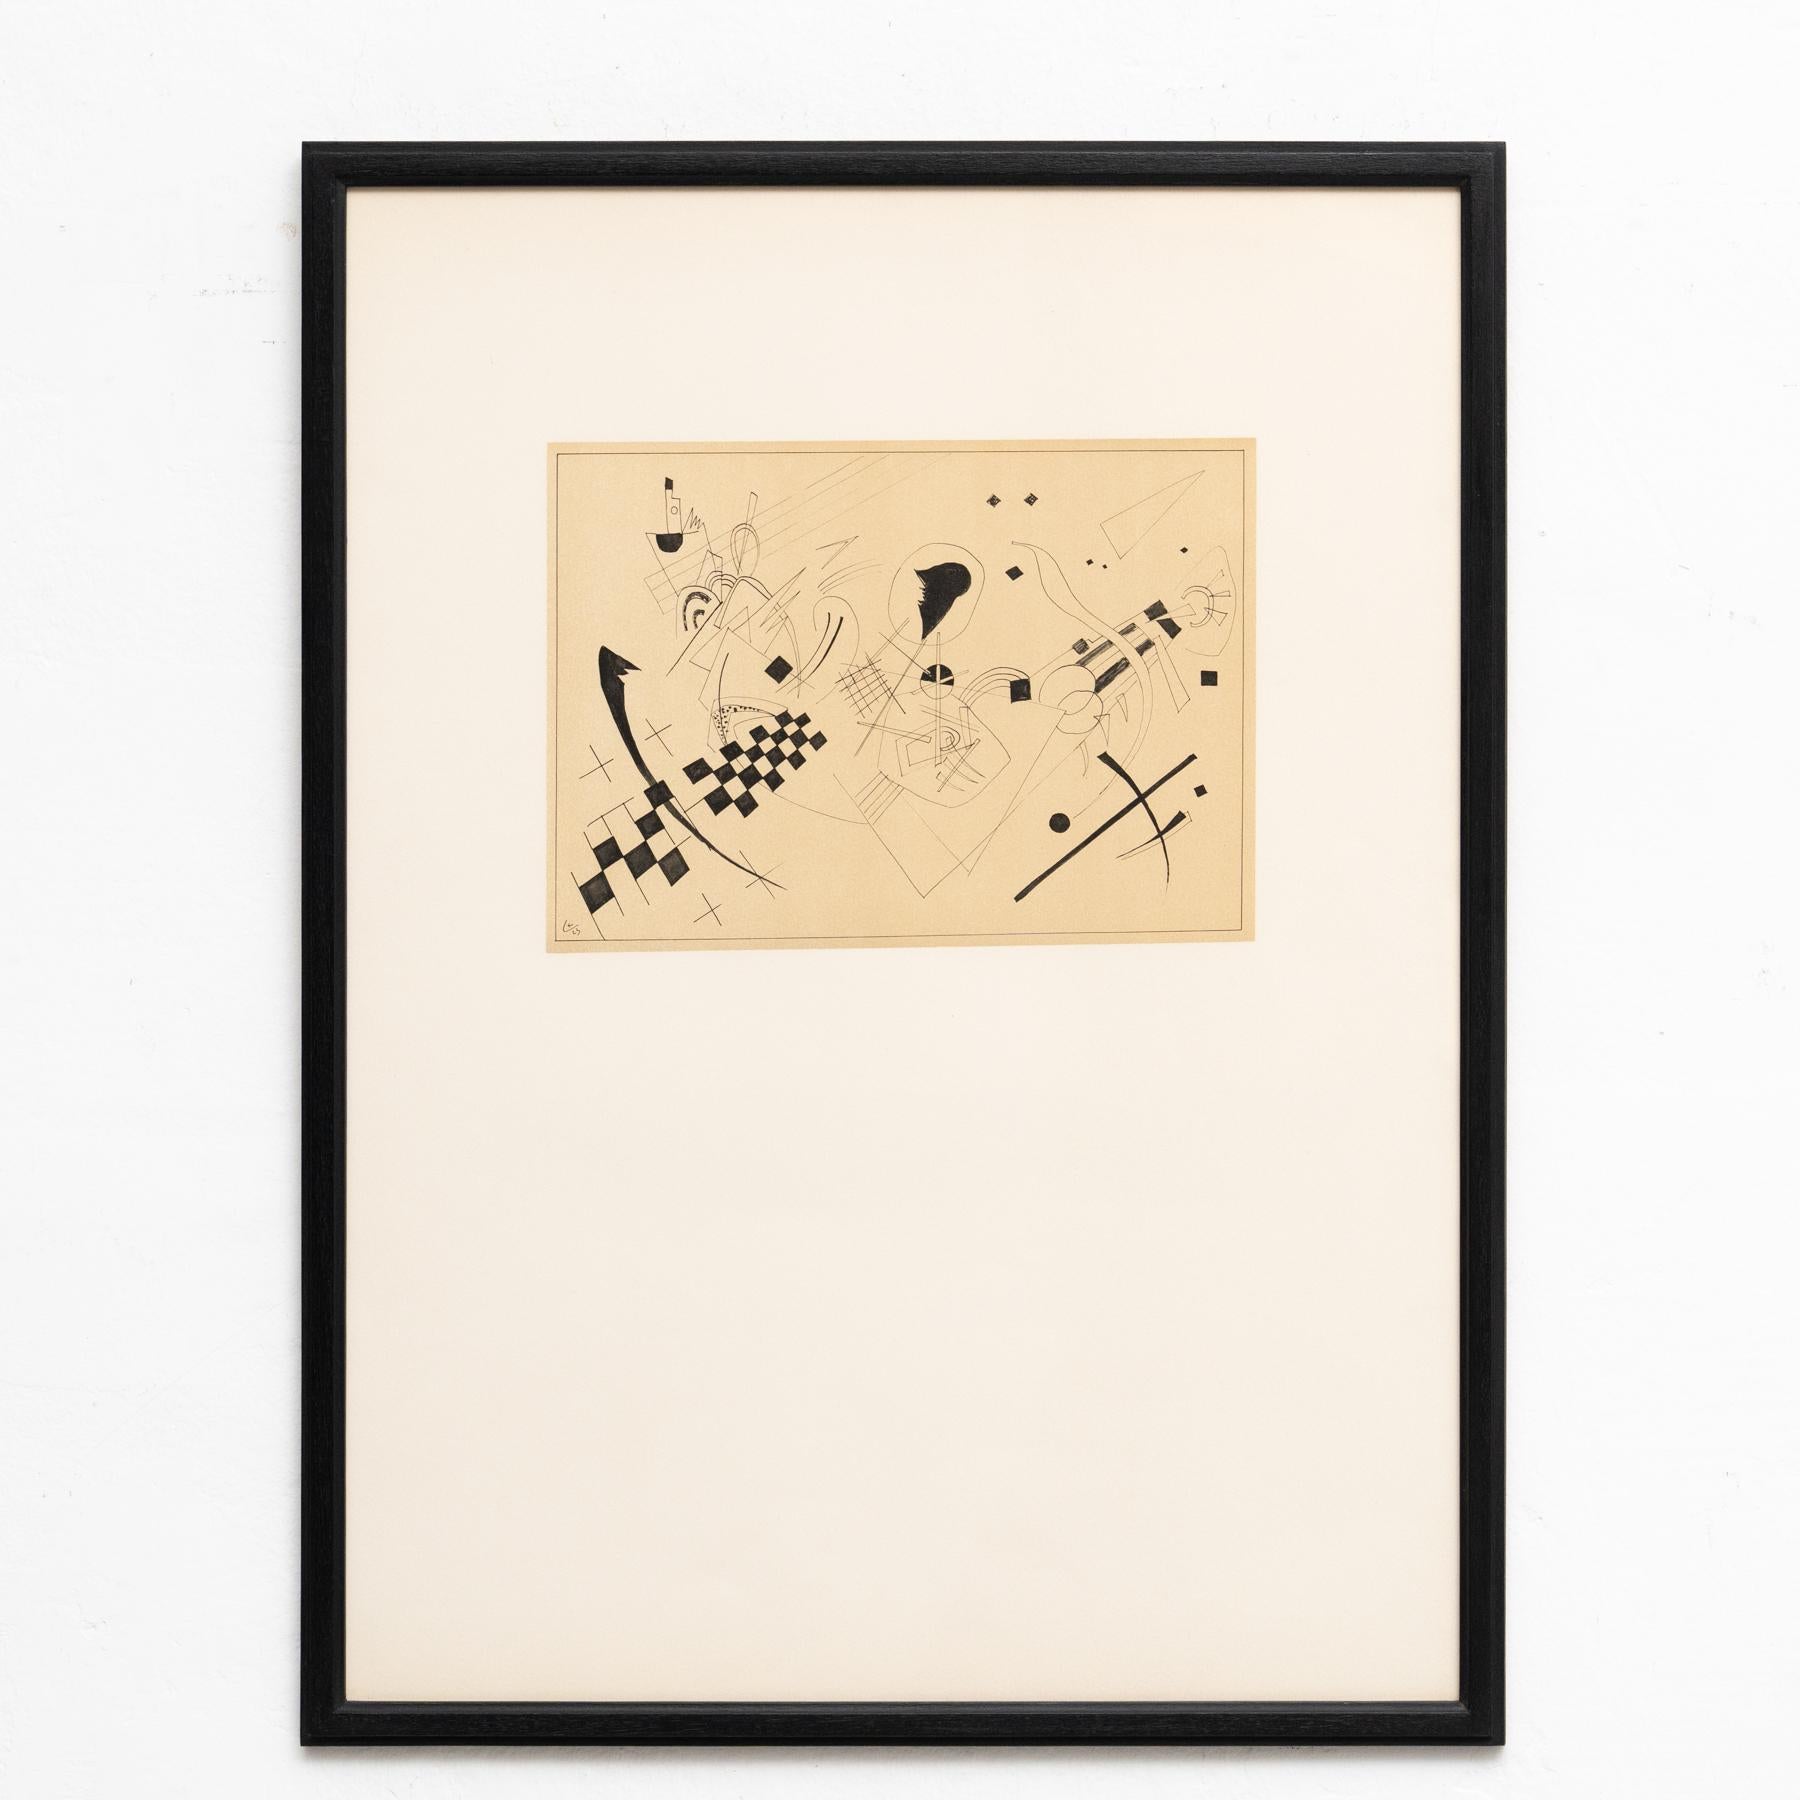 Wasily Kandinsky framed abstract etching.

Made by the artist in Russia, circa 1960

Framed in Barcelona by a local artisan in natural fine wood.

In original condition, with minor wear consistent with age and use, preserving a beautiful